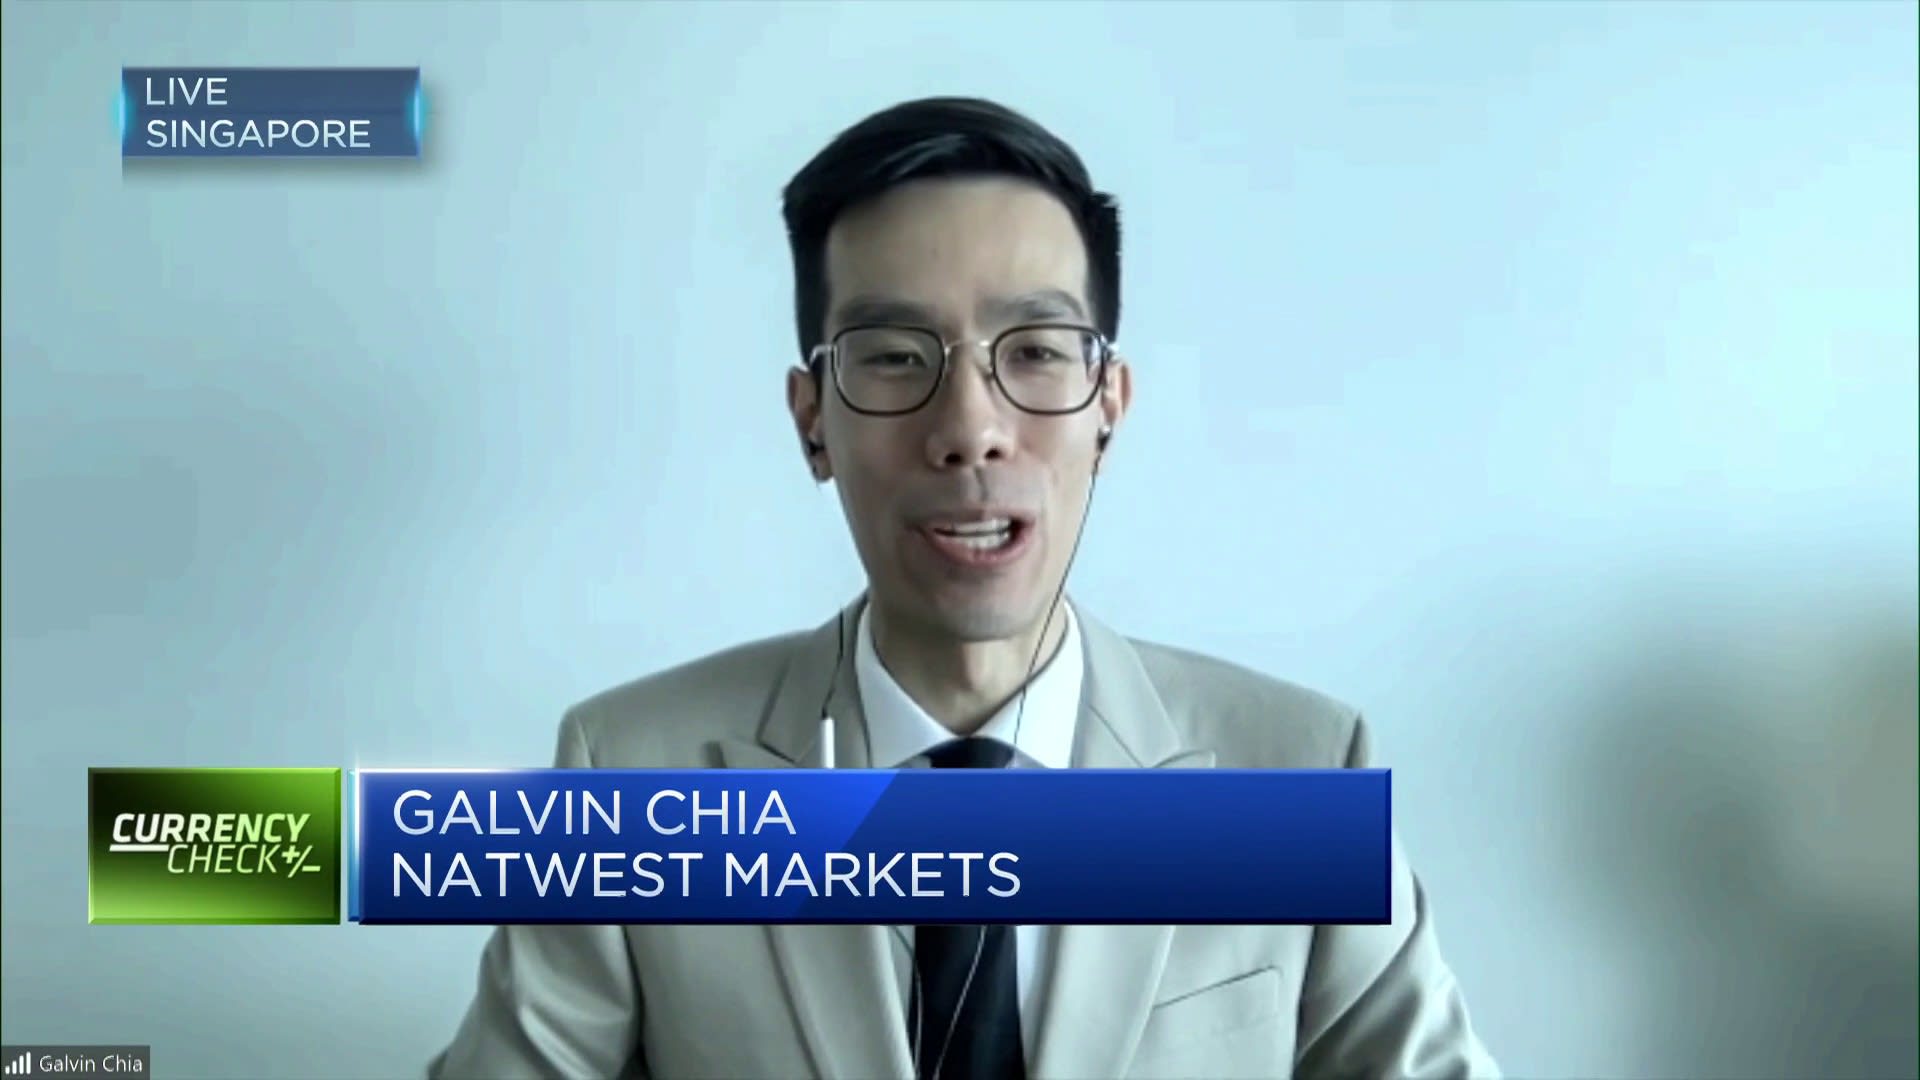 Chinese yuan will probably strengthen once headwinds from zero-Covid policy are gone: Strategist